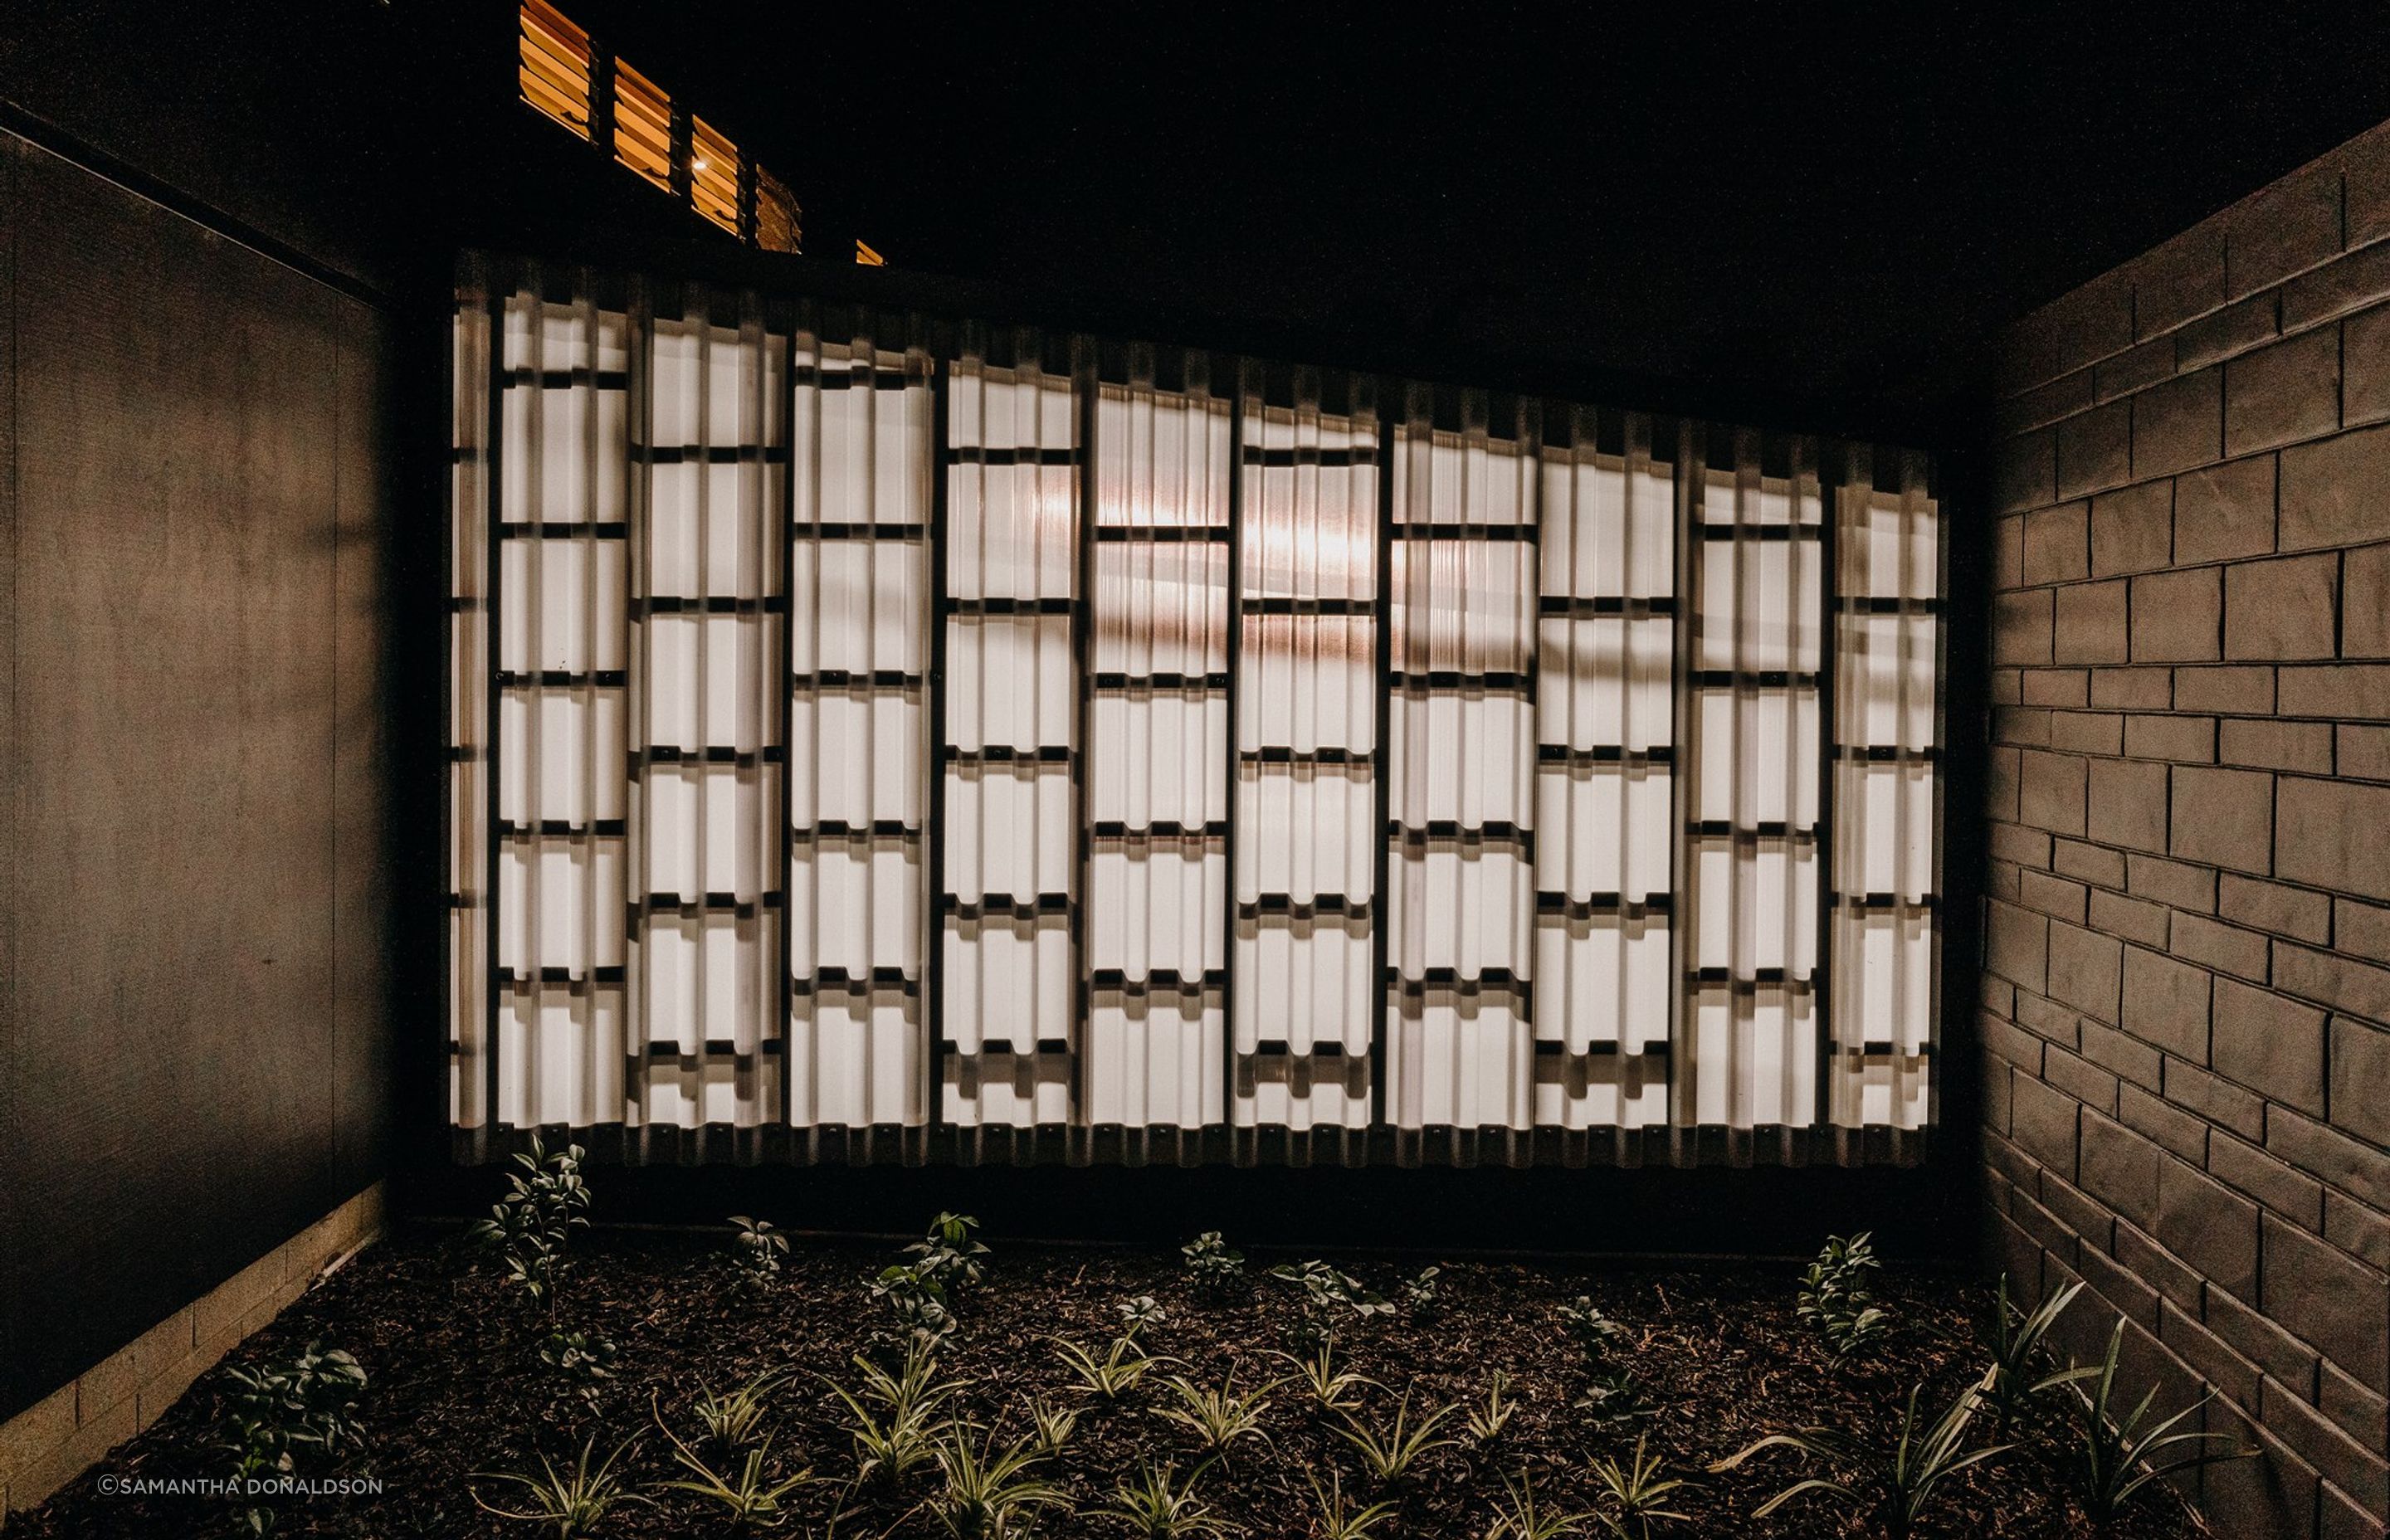 A translucent panel allows for the entrance area to be illuminated at night by the internal garage lighting. 